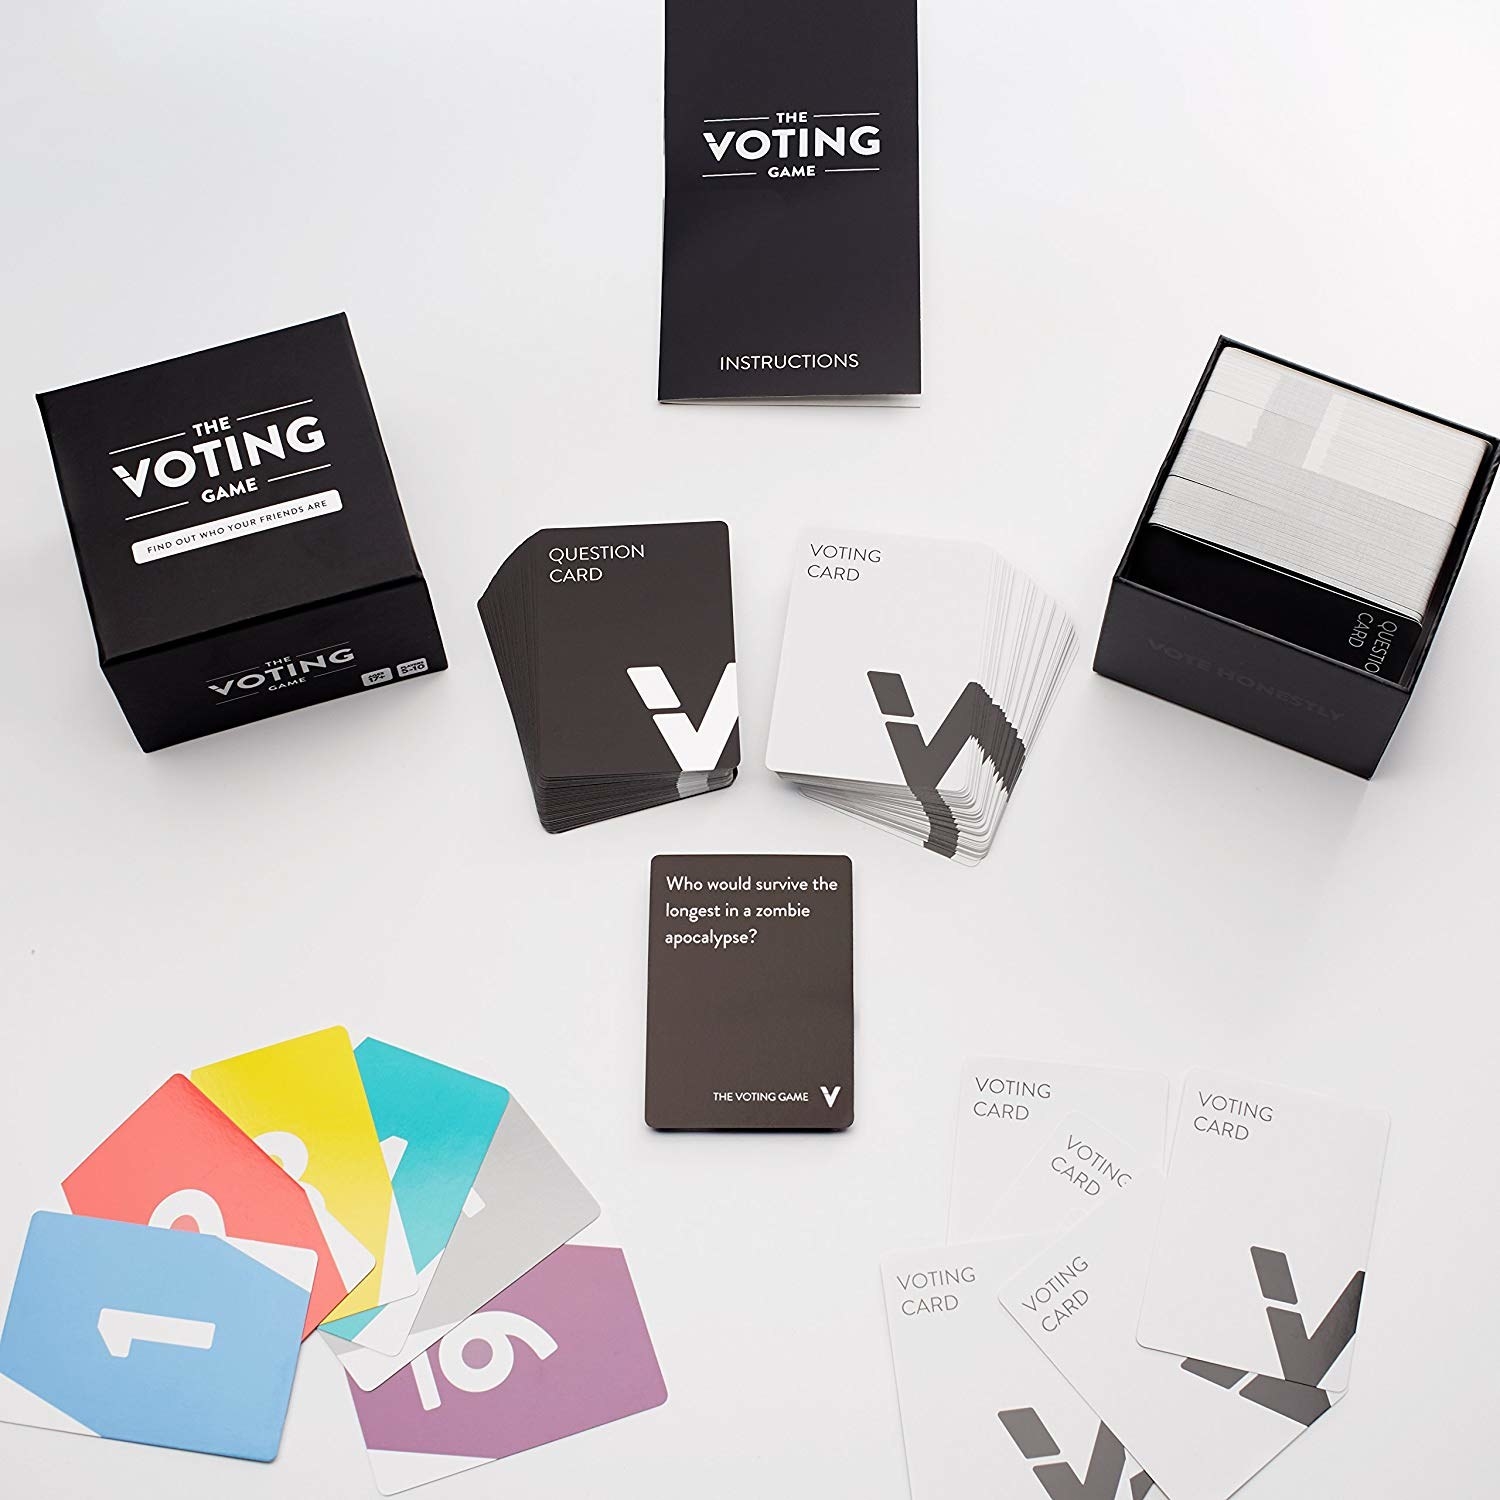 the game&#x27;s prompt cards and voting cards laid out